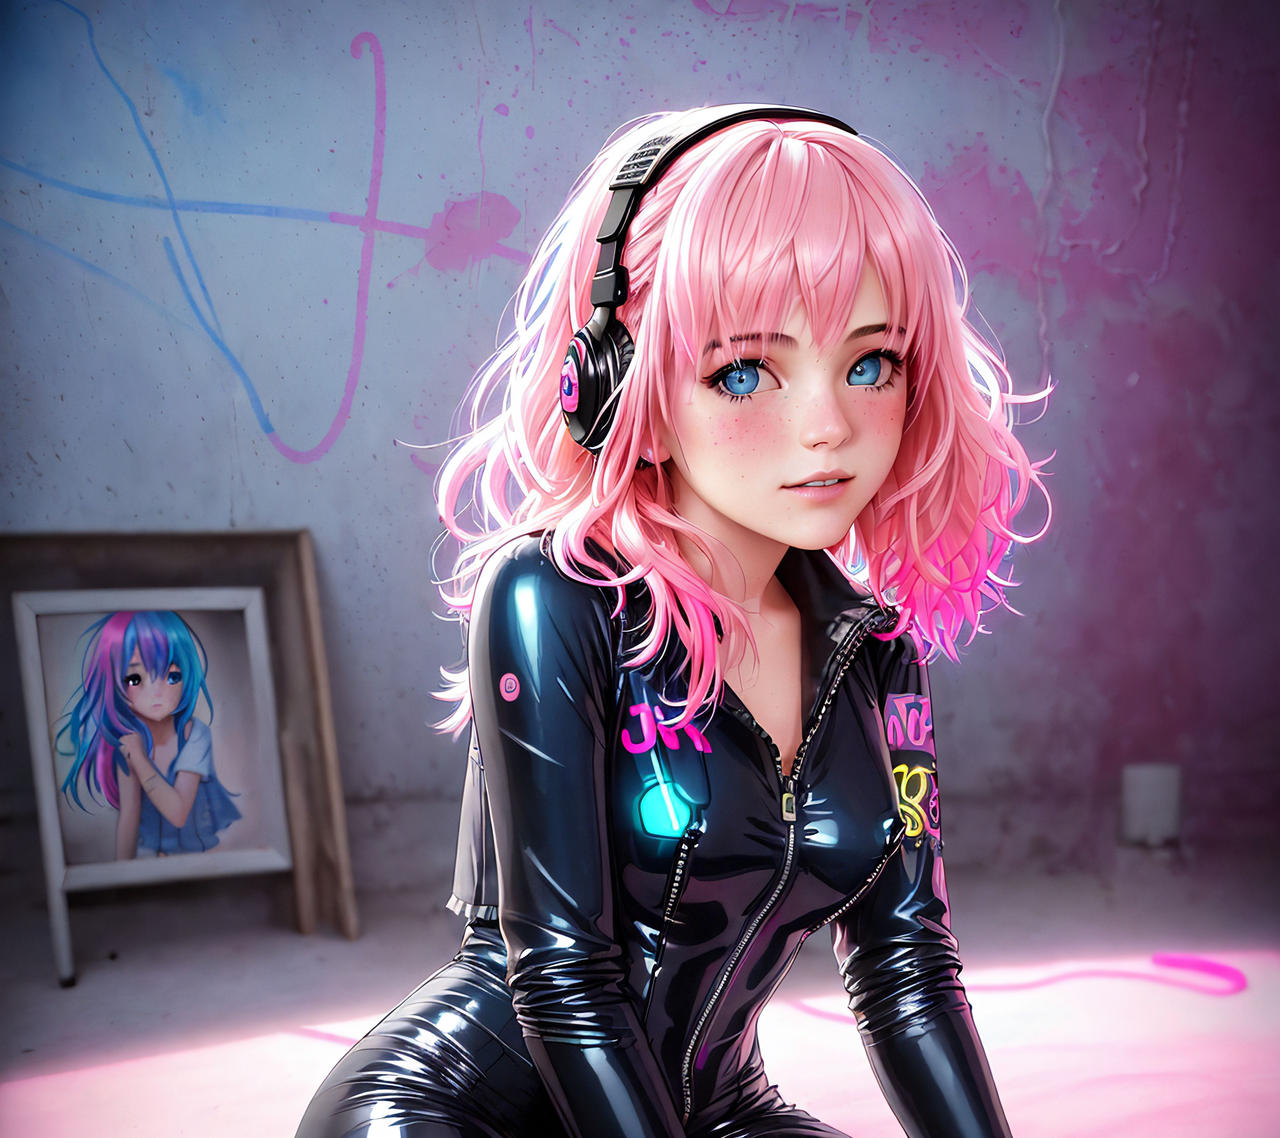 Neon Latex Girl 8 By Neuromage On Deviantart